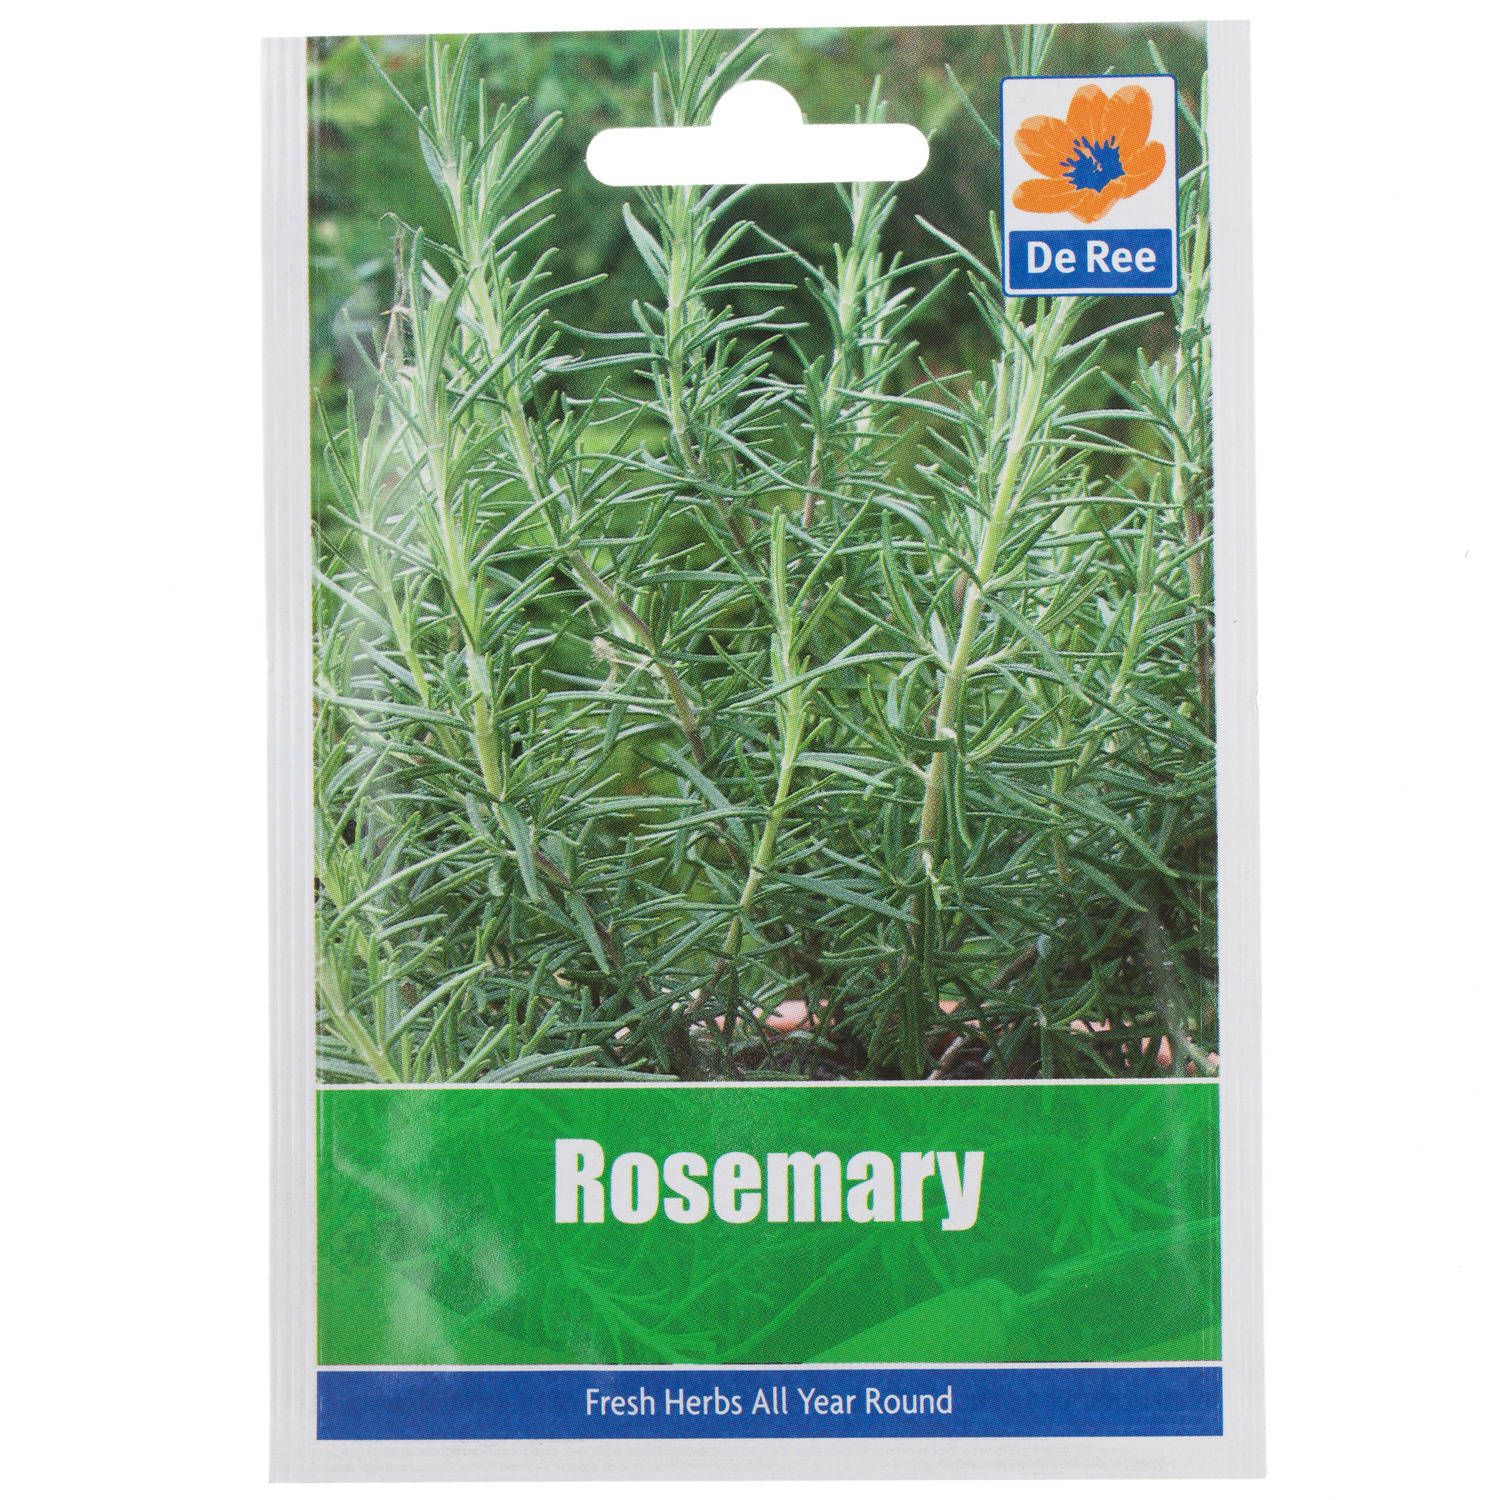 Rosemary Seed Packet Image